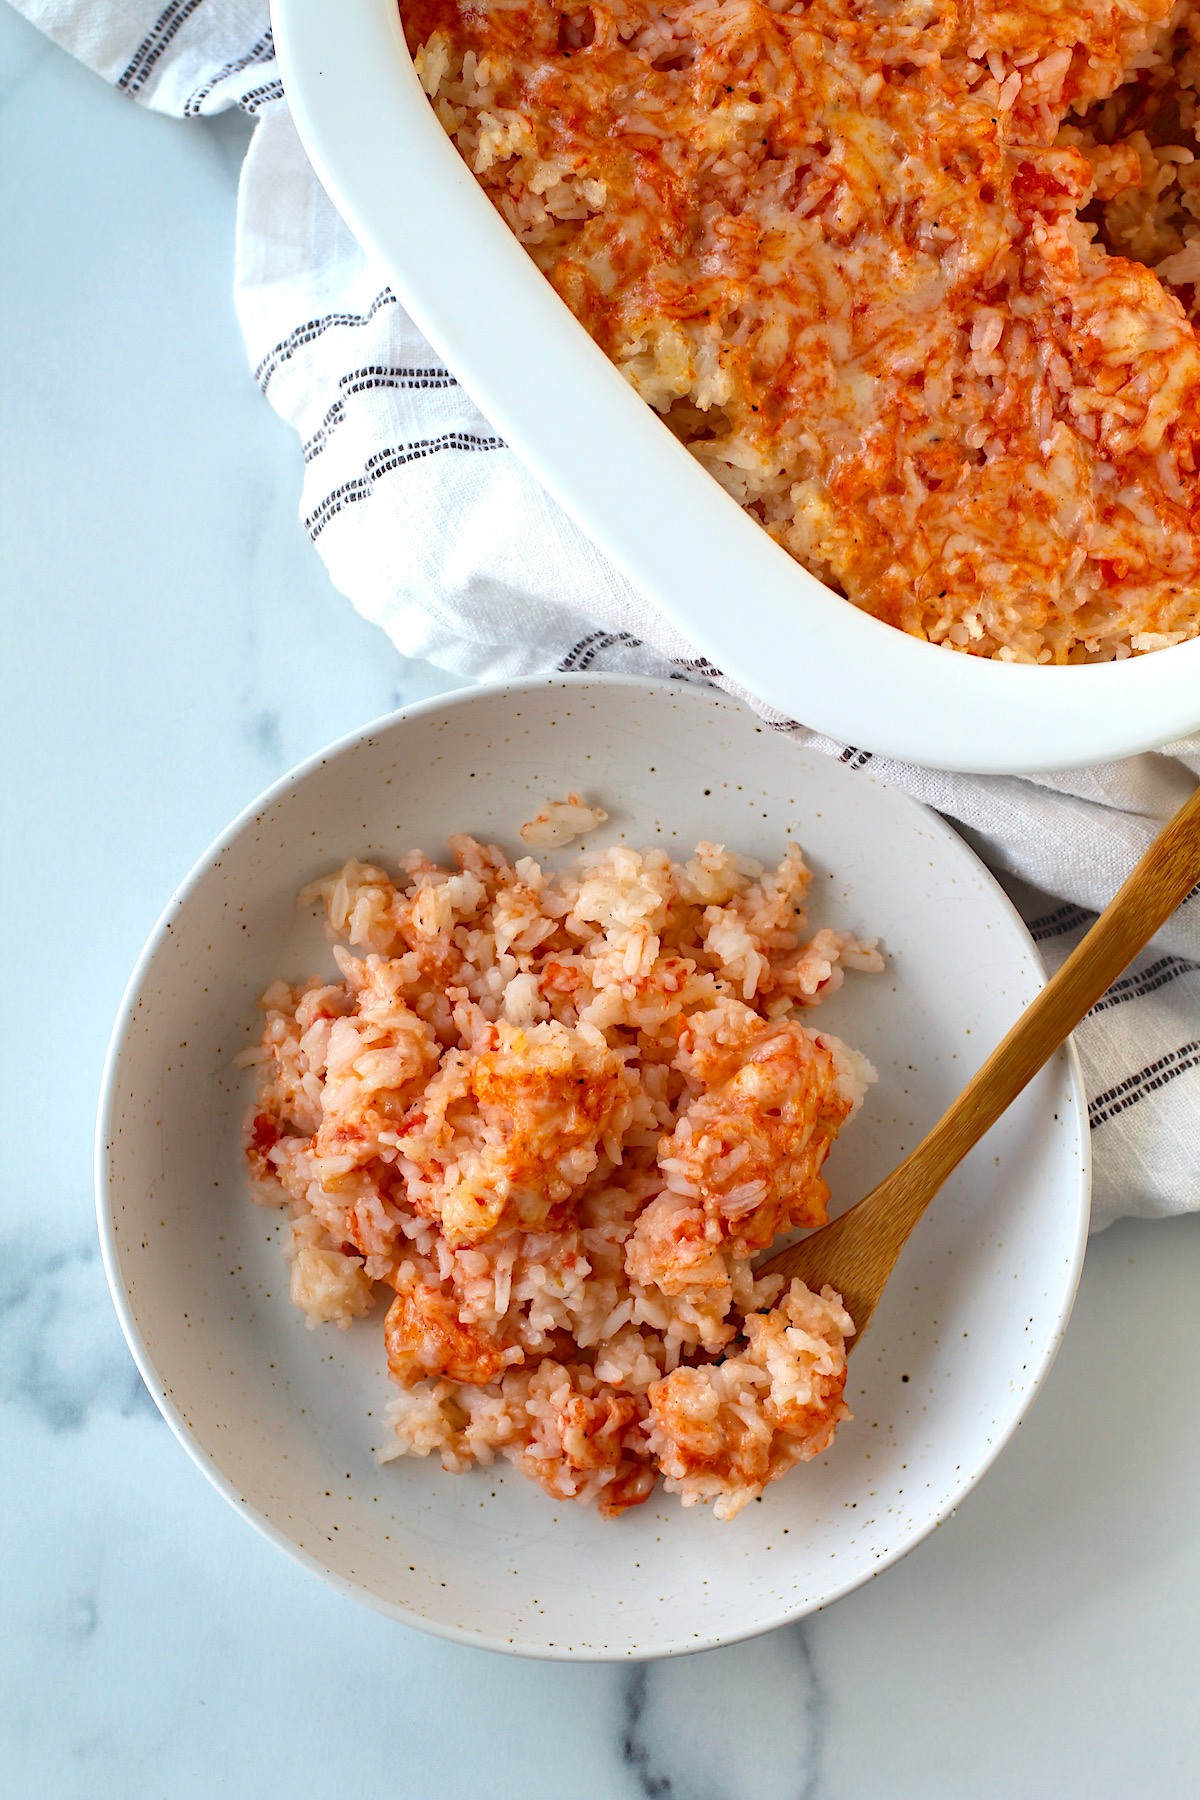 Spoon in bowl of Baked Rice with Cheese and Tomatoes with casserole dish in background.